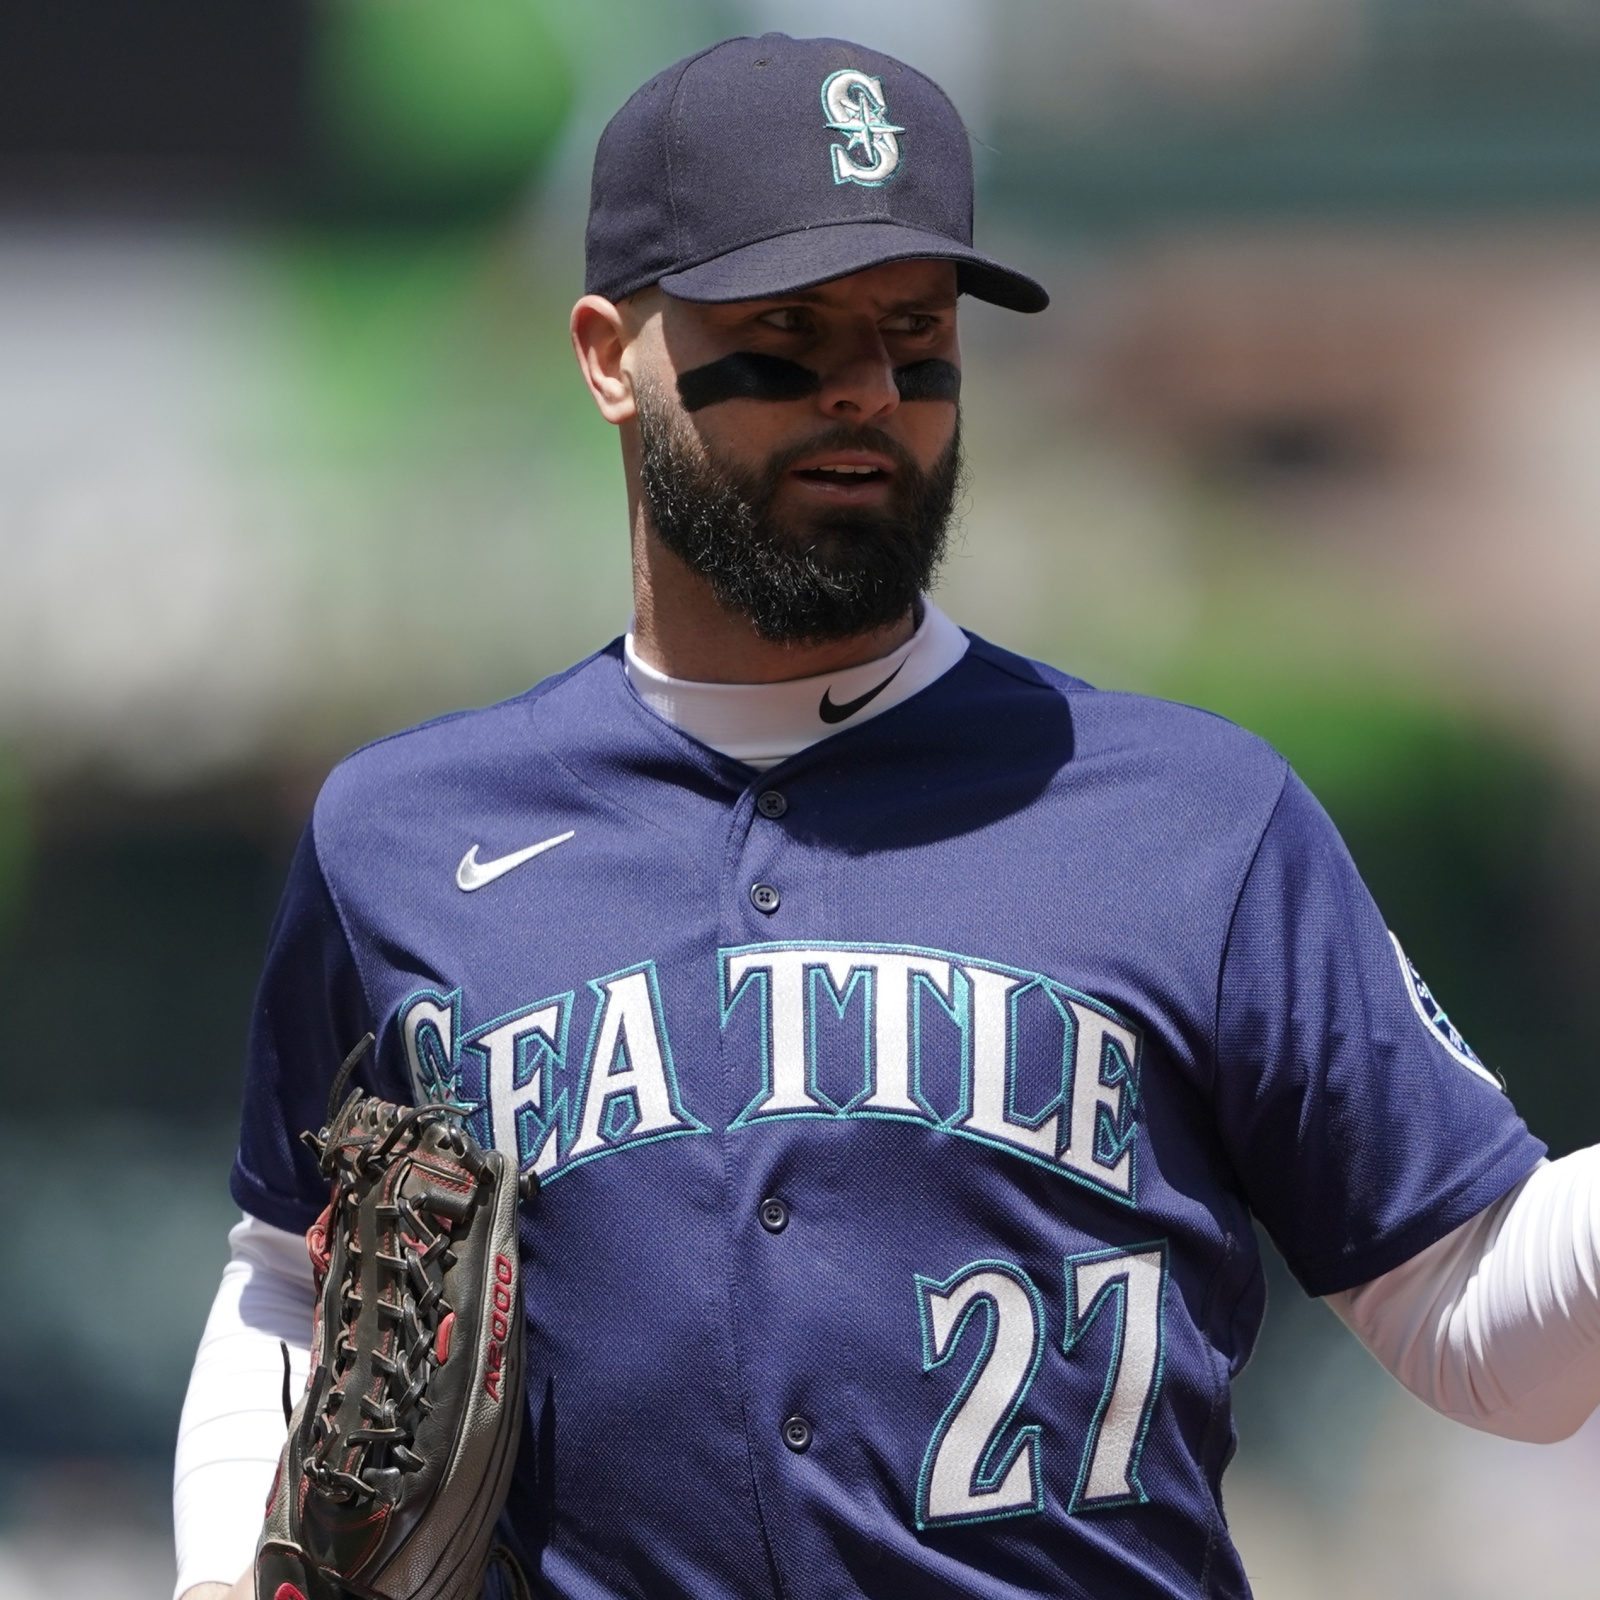 Mariners – Angels brawl: Jesse Winker gets pizza delivered from fan